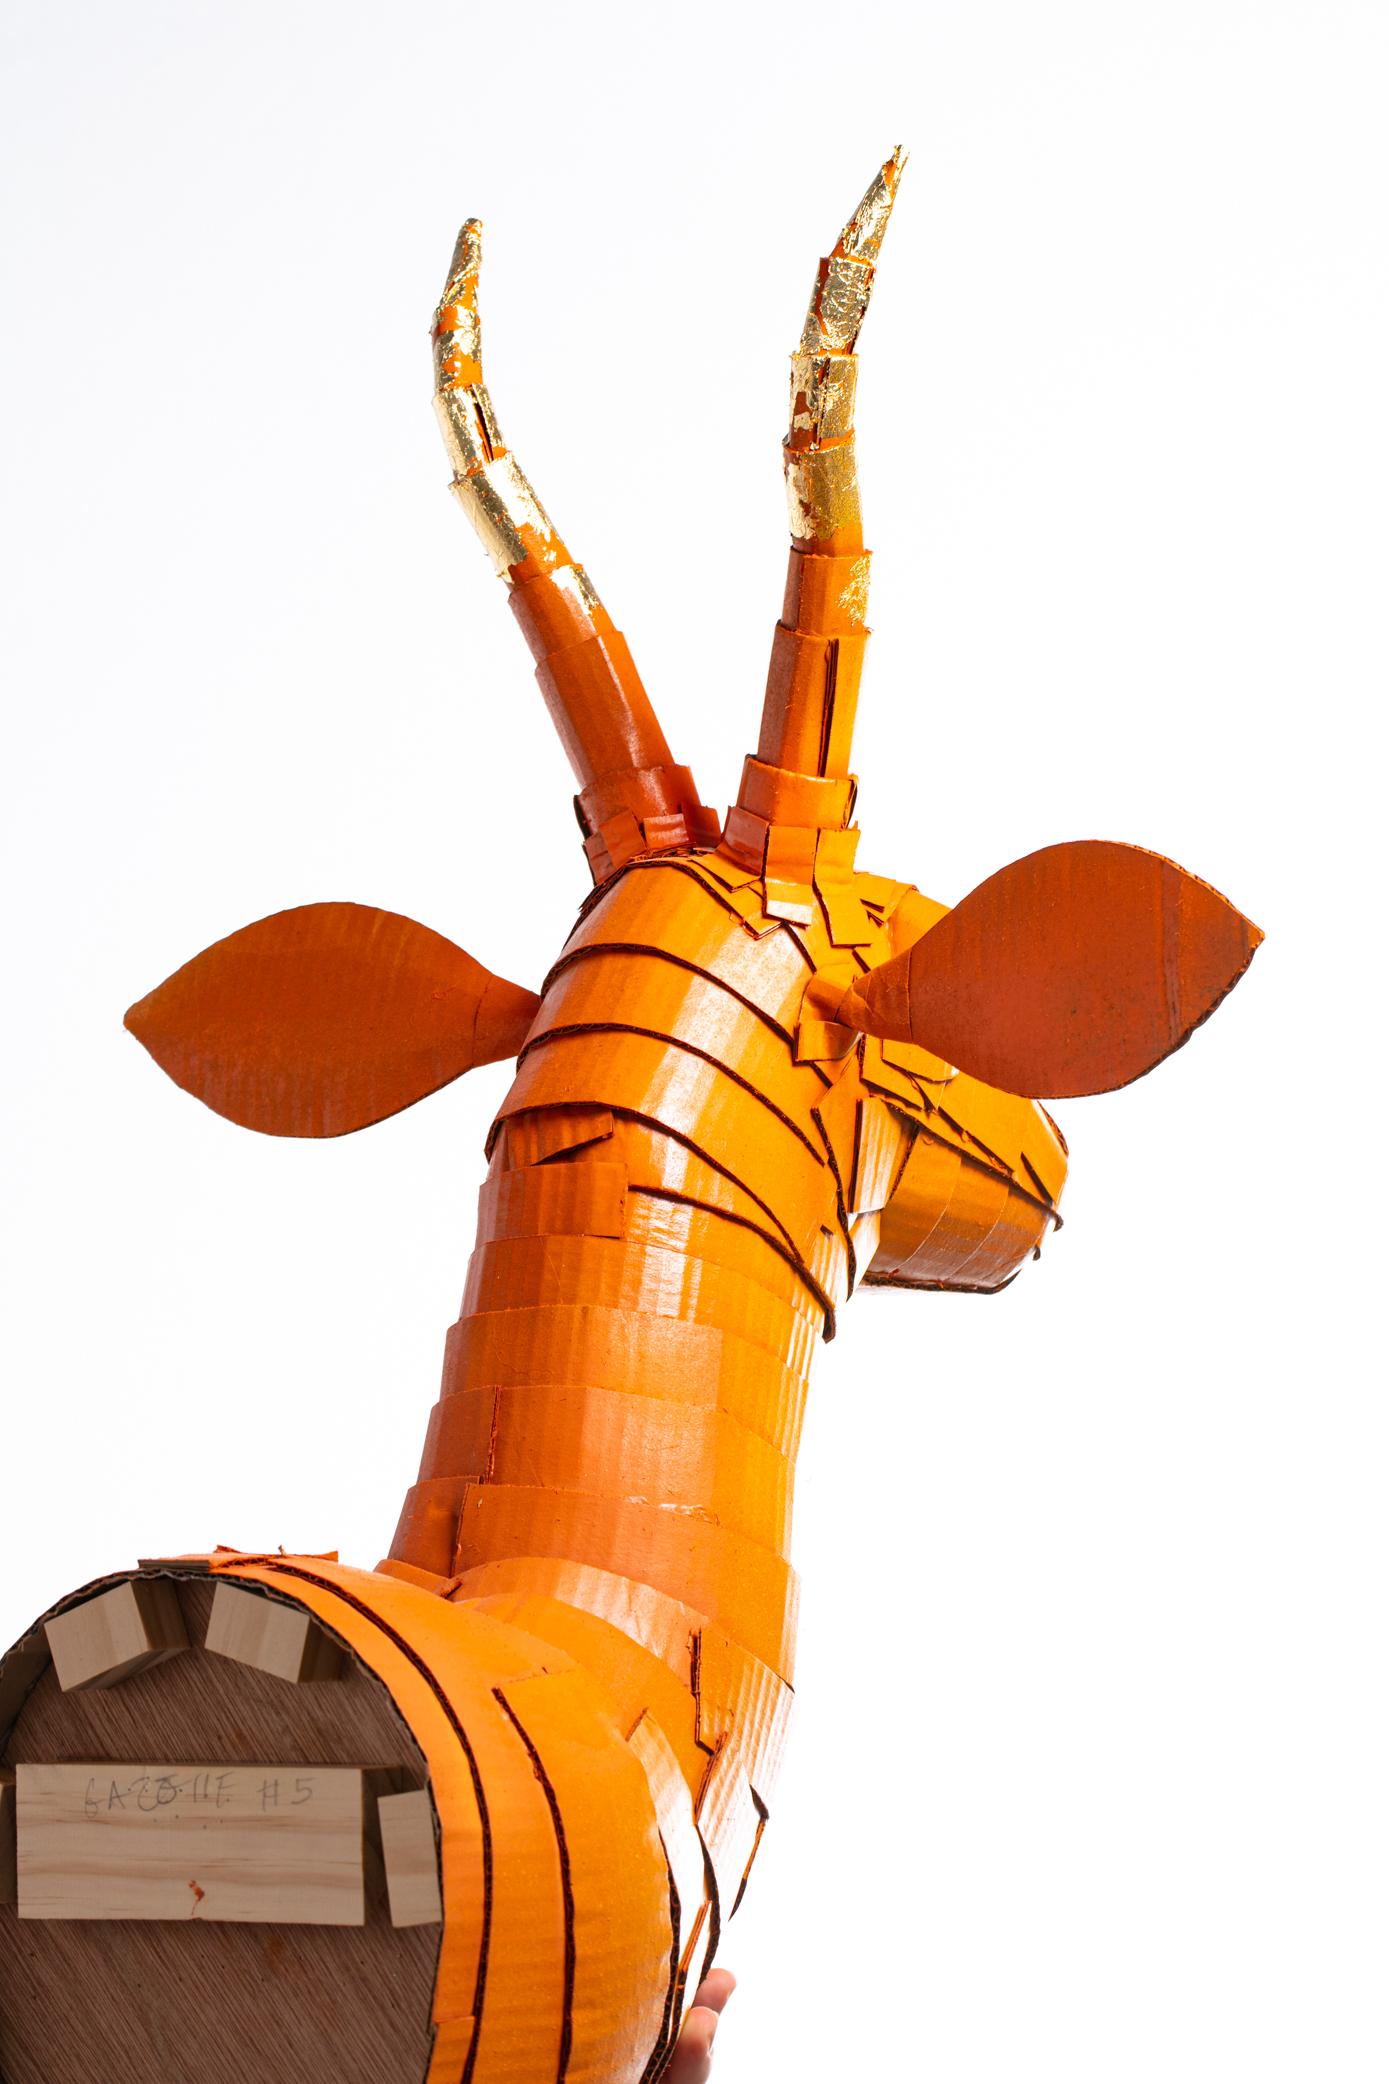 Gazelle sculpture in Persimmon Orange with Gold Leaf Horn Detail meticulously created by Artist Justin King from individually cut and folded pieces of cardboard and papier-mâché. King’s choice of color and ornamental detail emphasize the spirit of